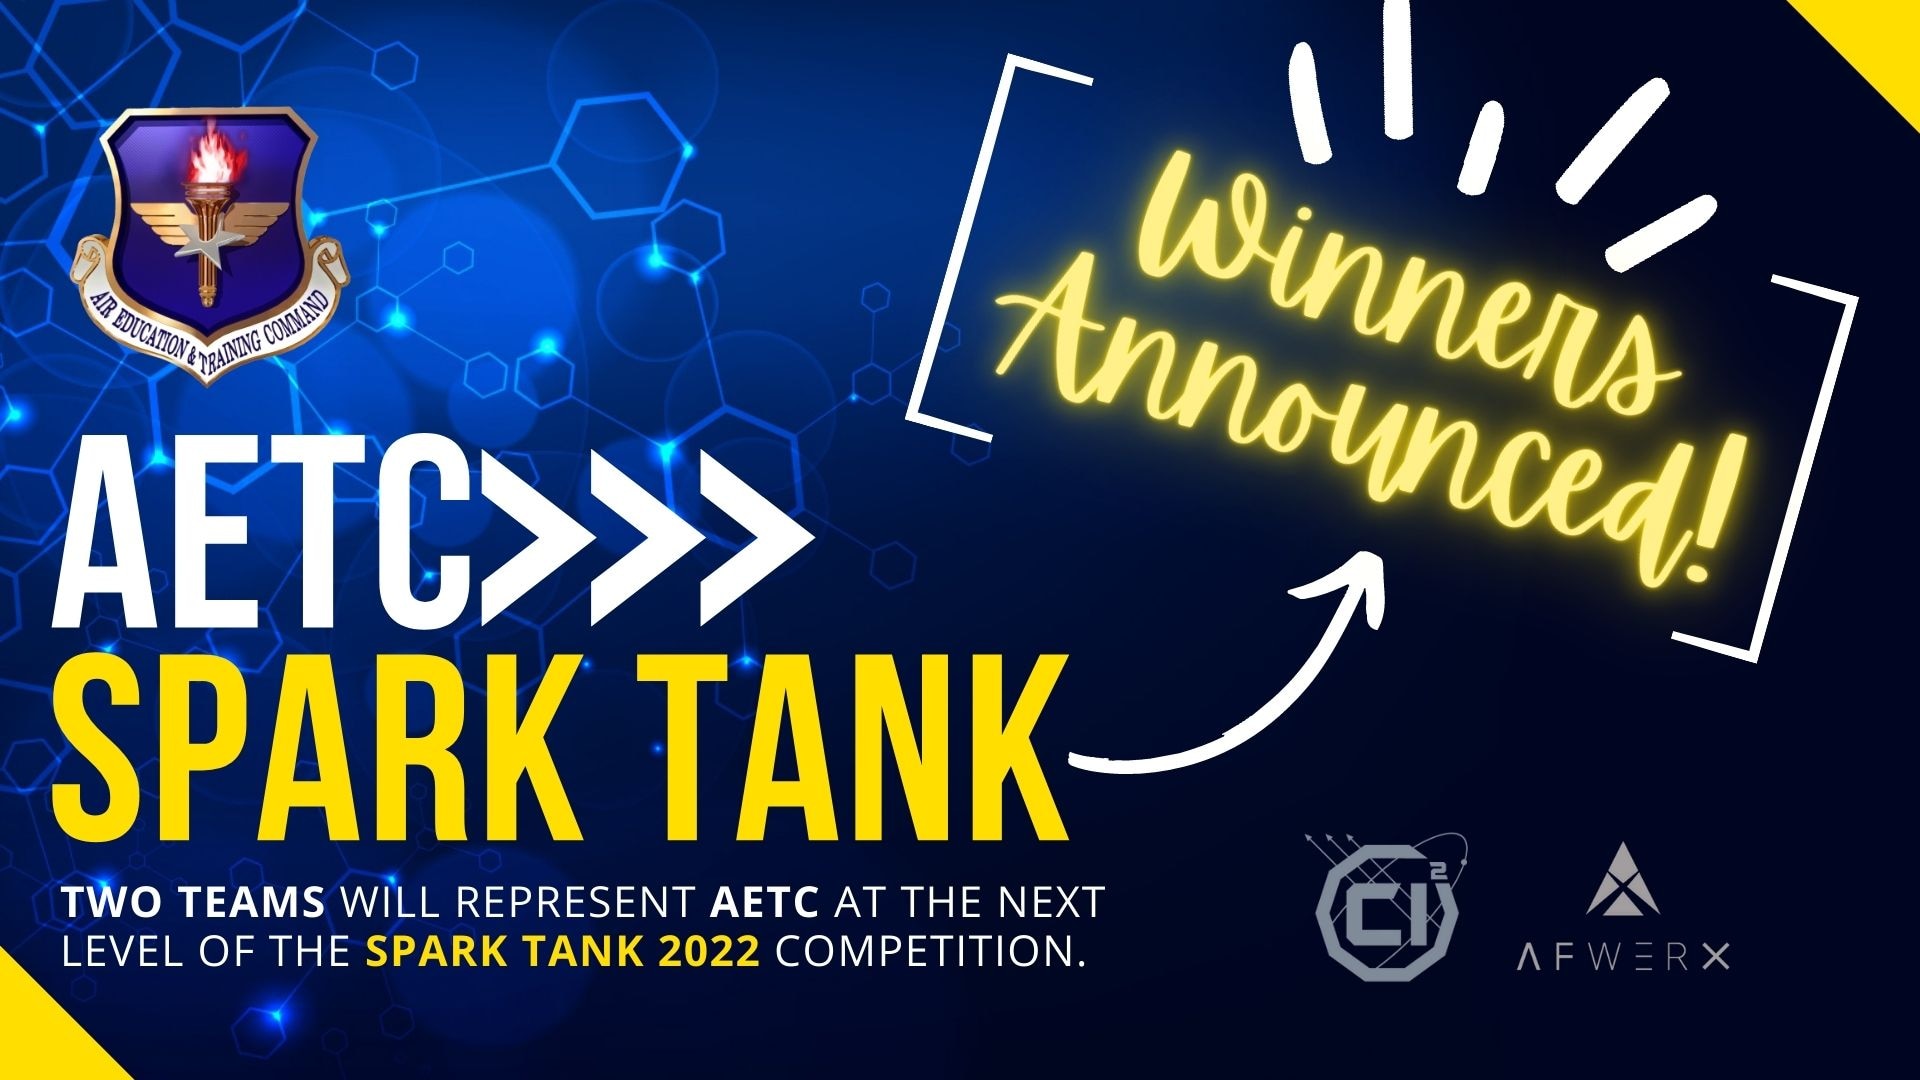 graphic announcing AETC's Spark Tank winners selection